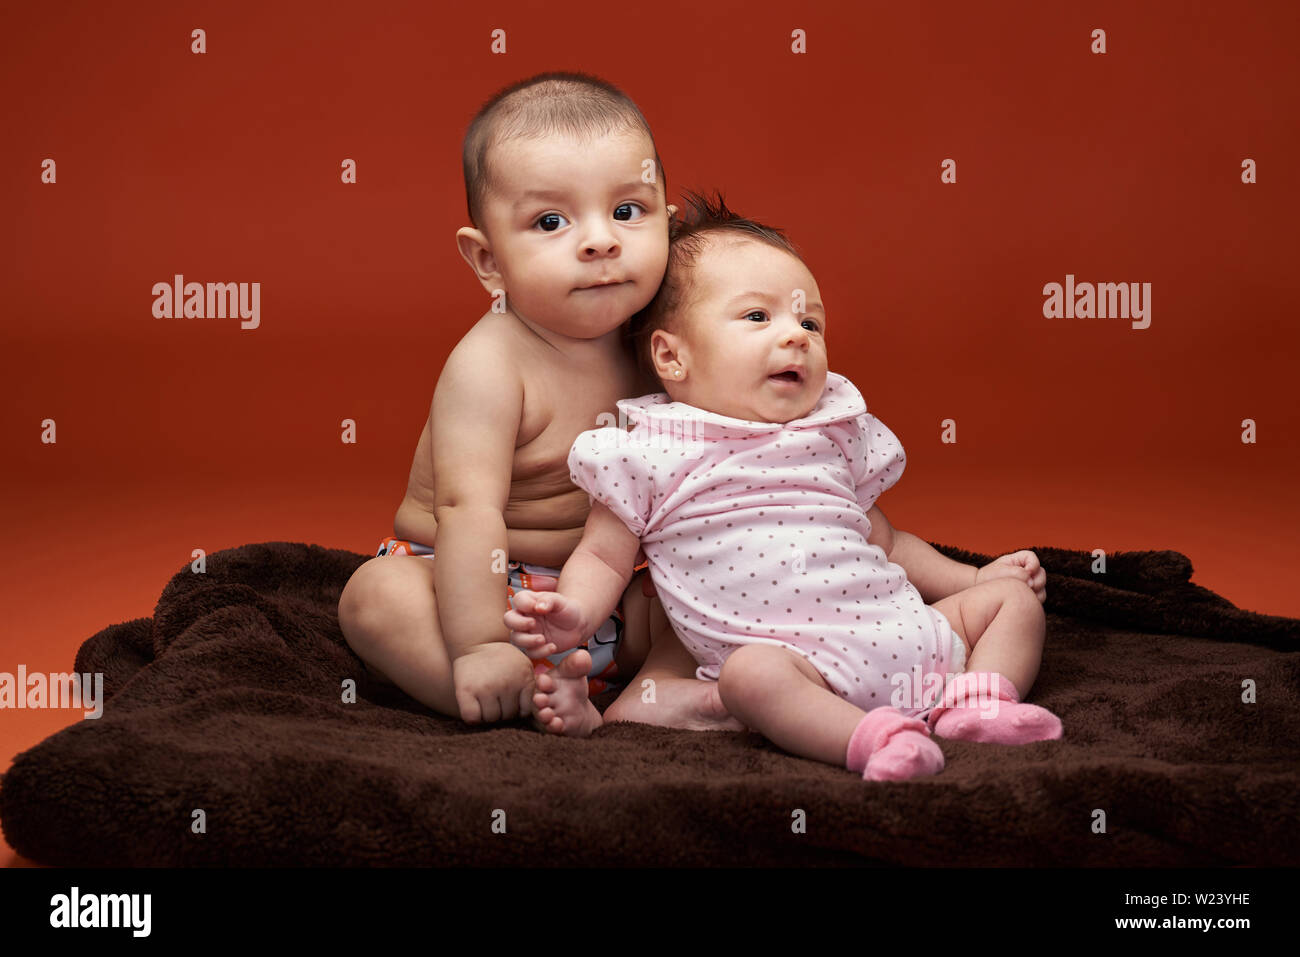 Portrait of two cute little babies sitting in orange color studio background Stock Photo